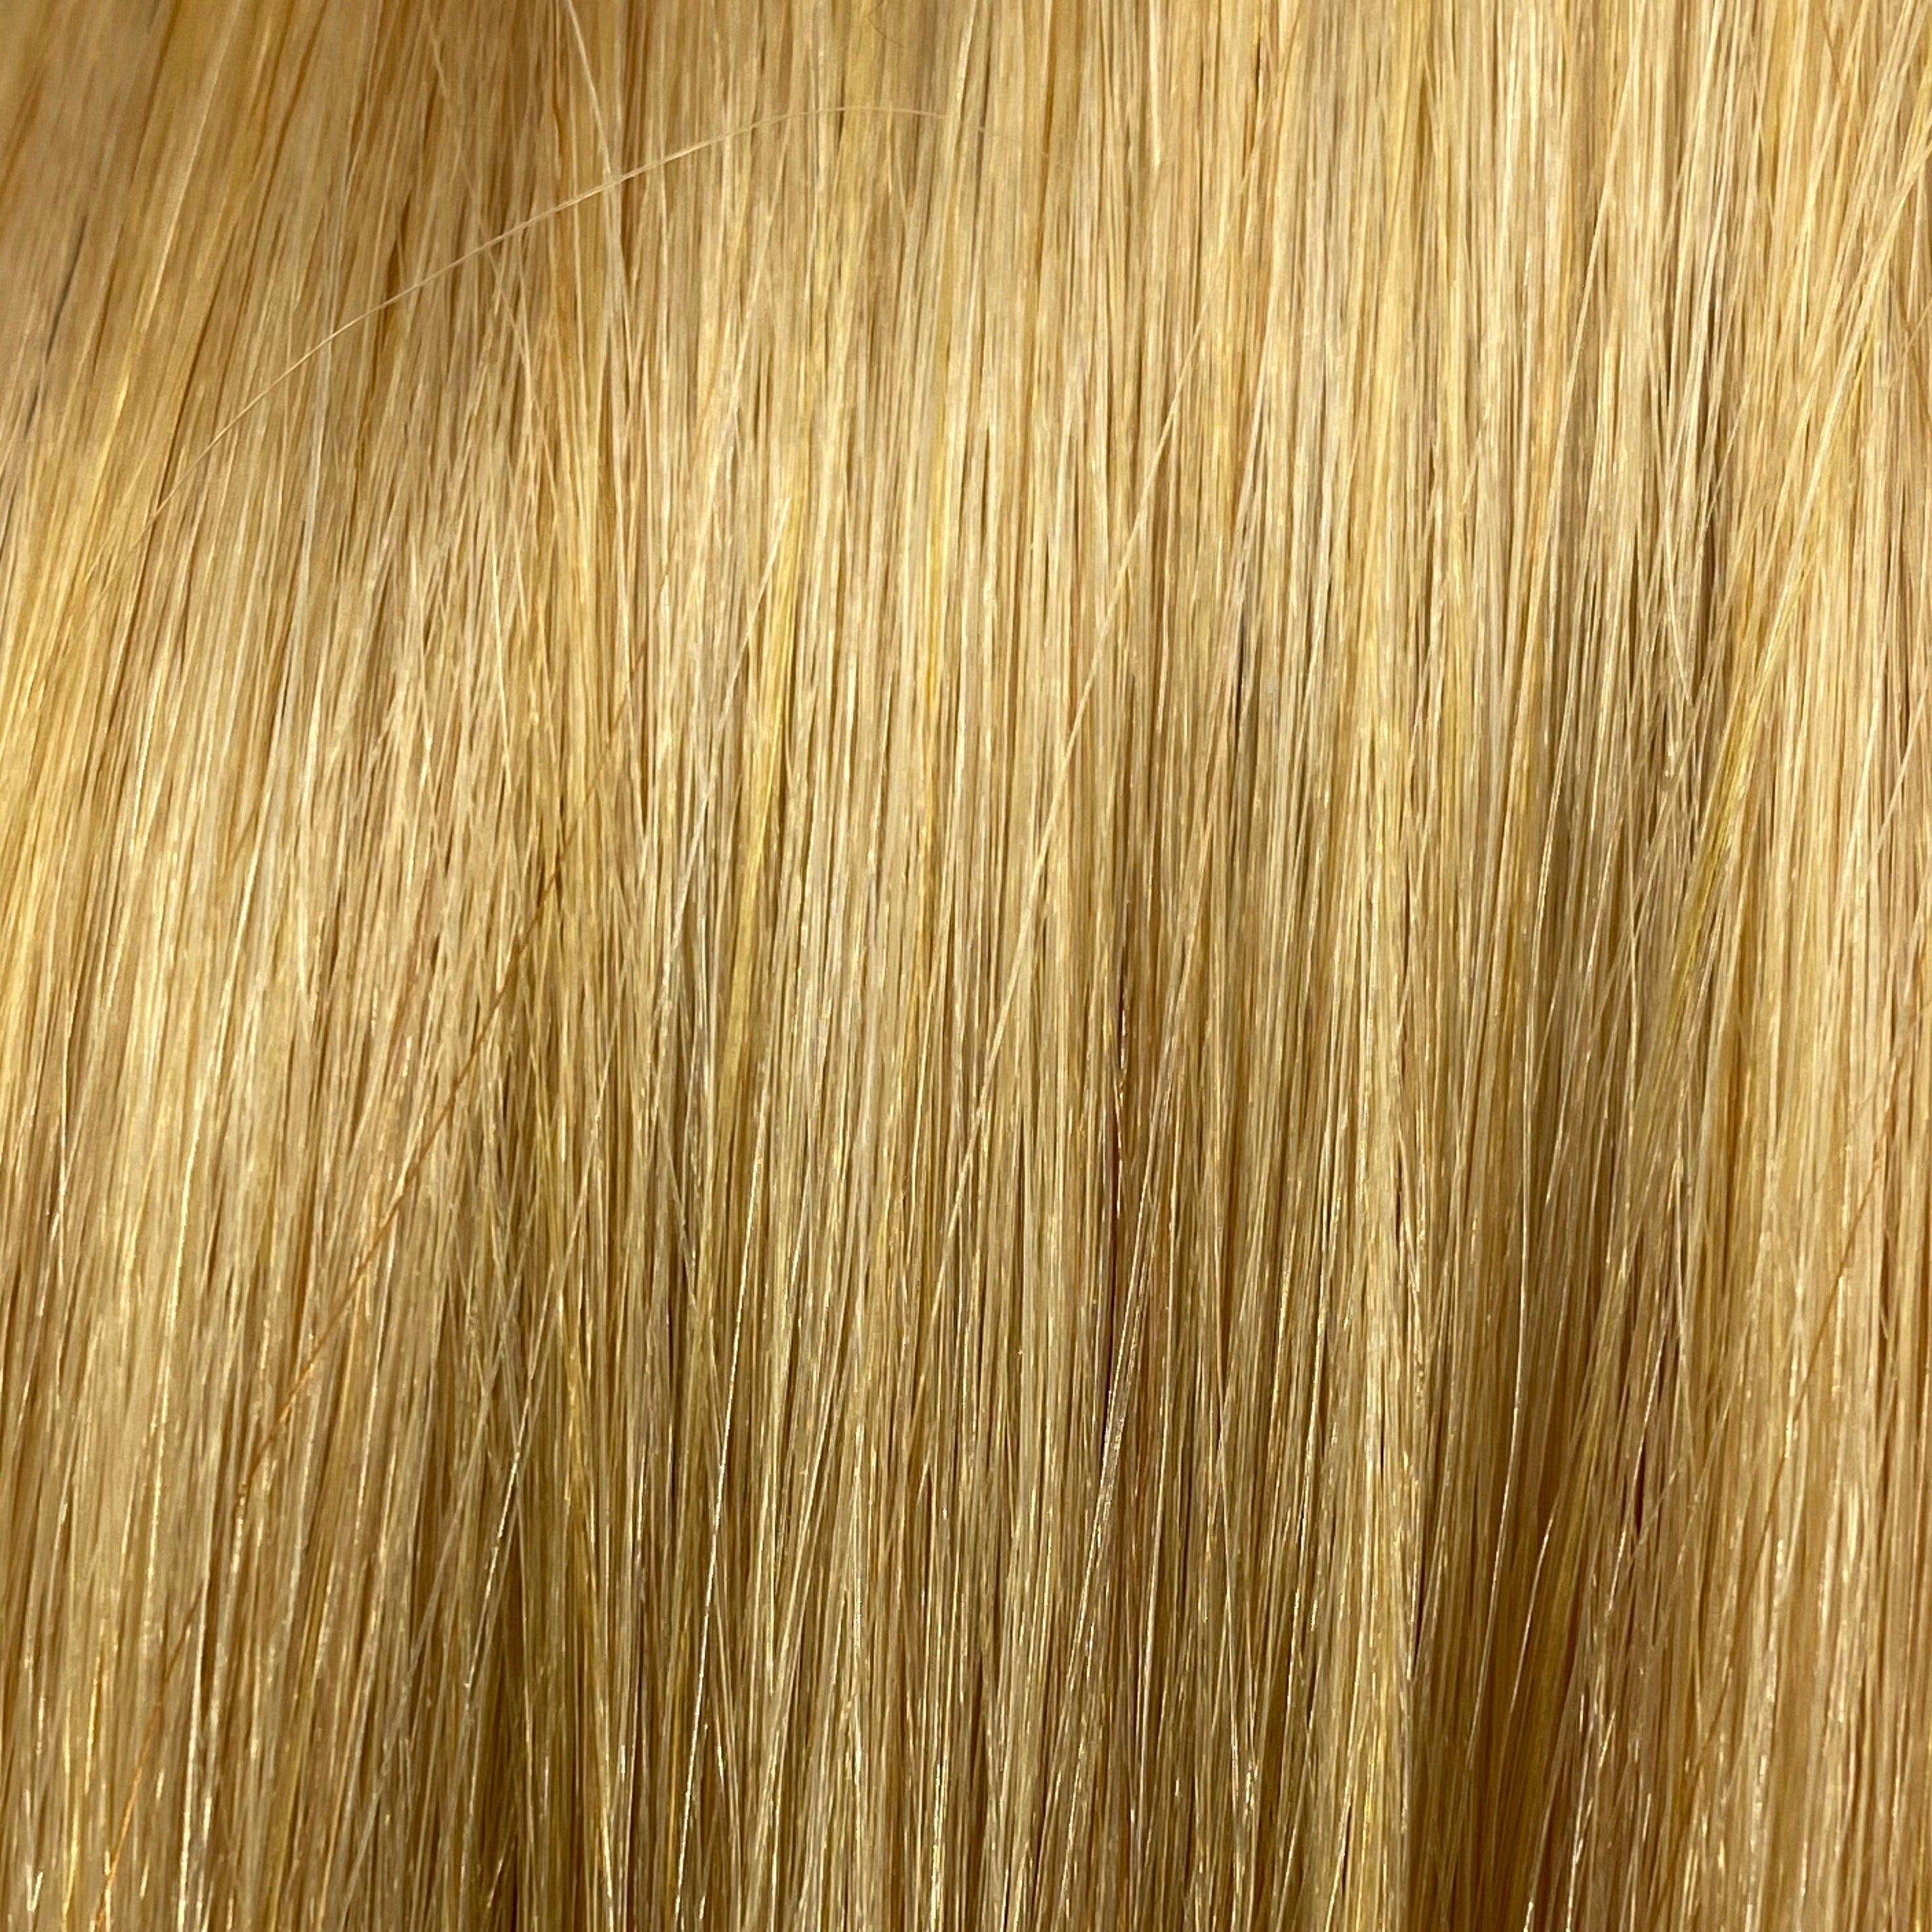 FUSION #20 VERY LIGHT ULTRA BLONDE 50CM/ 20 INCHES  -  20 GRAMS